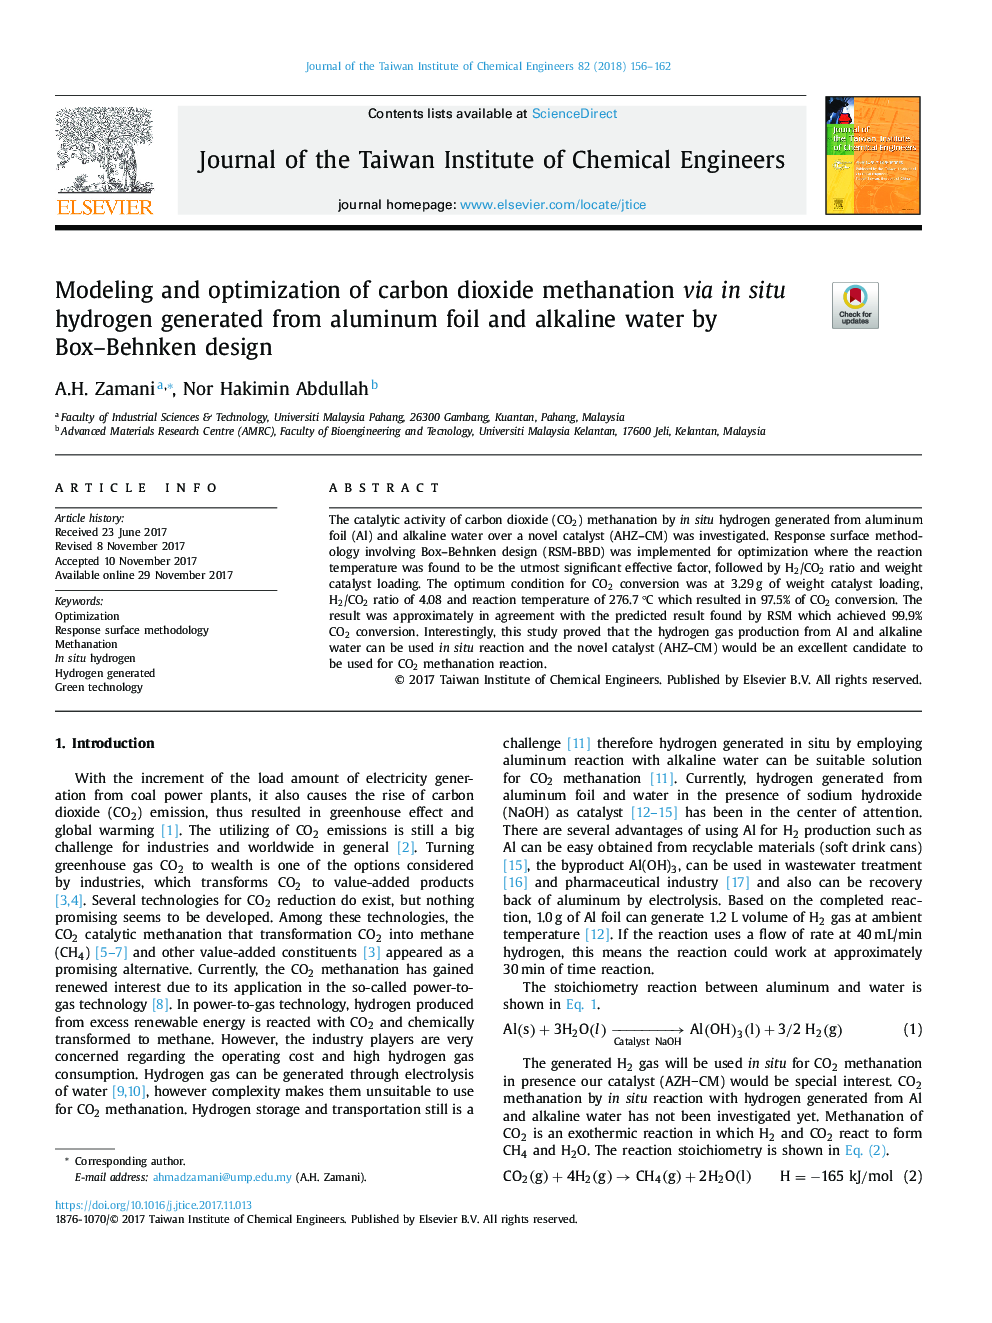 Modeling and optimization of carbon dioxide methanation via in situ hydrogen generated from aluminum foil and alkaline water by Box-Behnken design